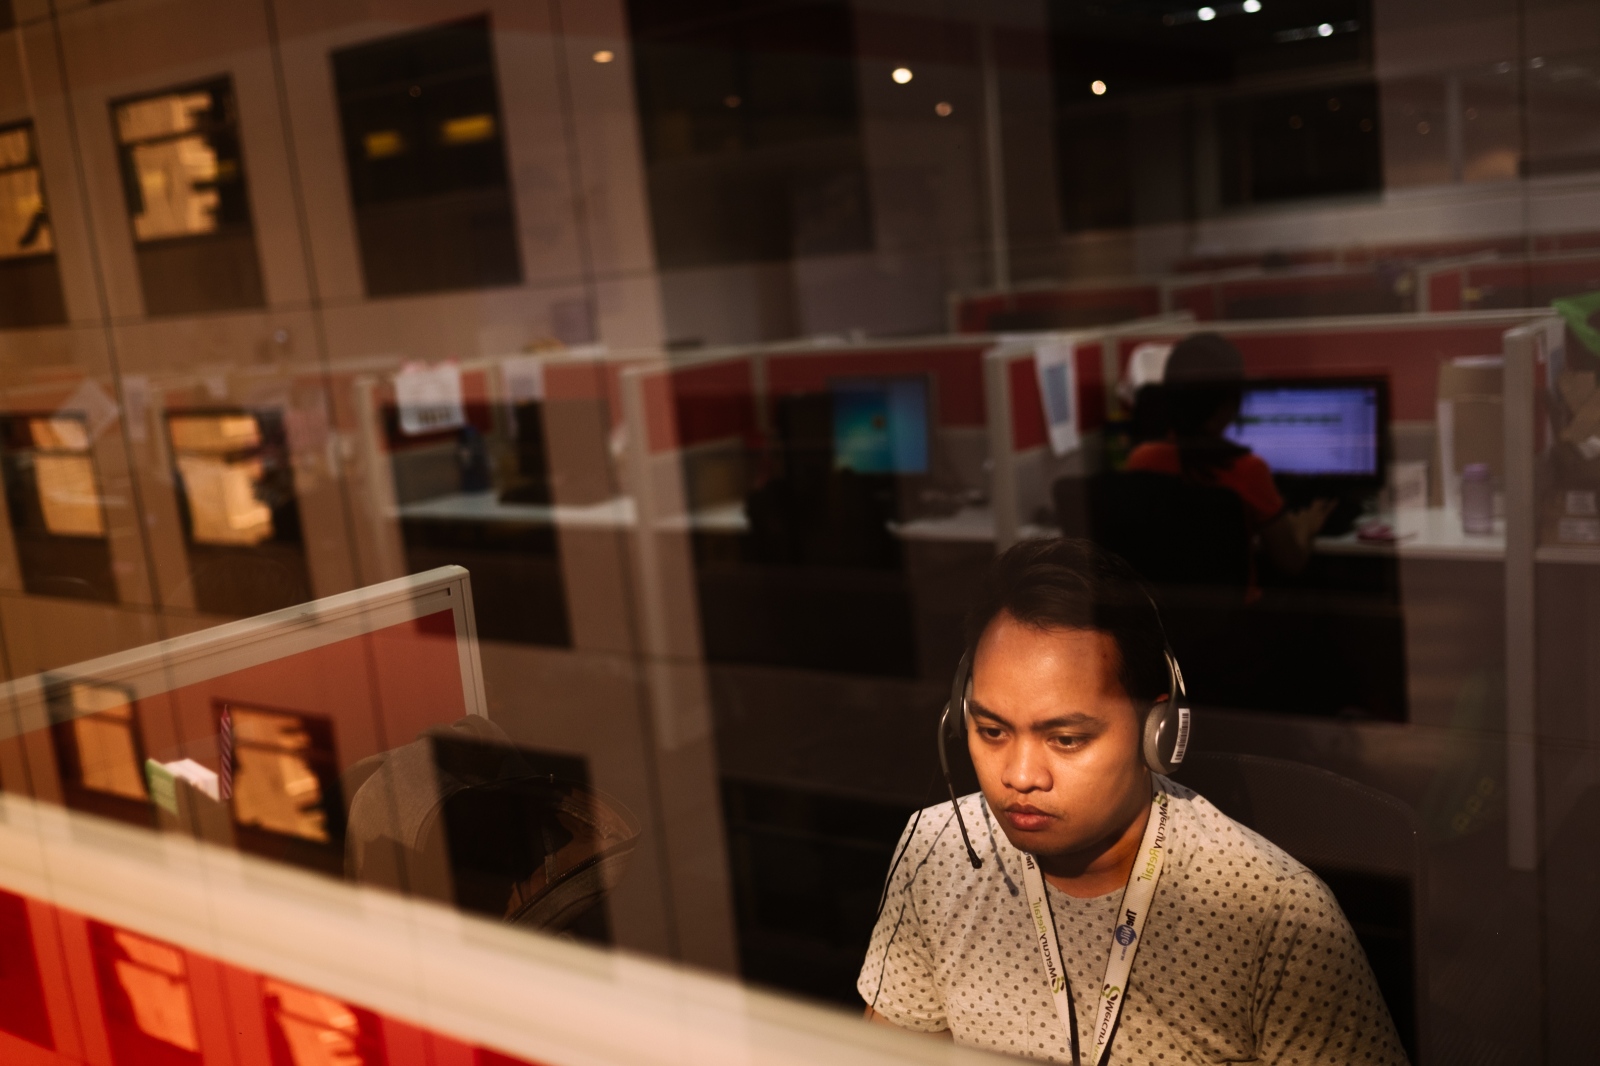 Erikson, 26 years old, &nbsp;is working on an Australian account. Bonofacio, Manila Philippines. 19th April 2016. &ldquo;In a call centre my life changed financially. Here I finally earn and can save good money,&rdquo; he said.